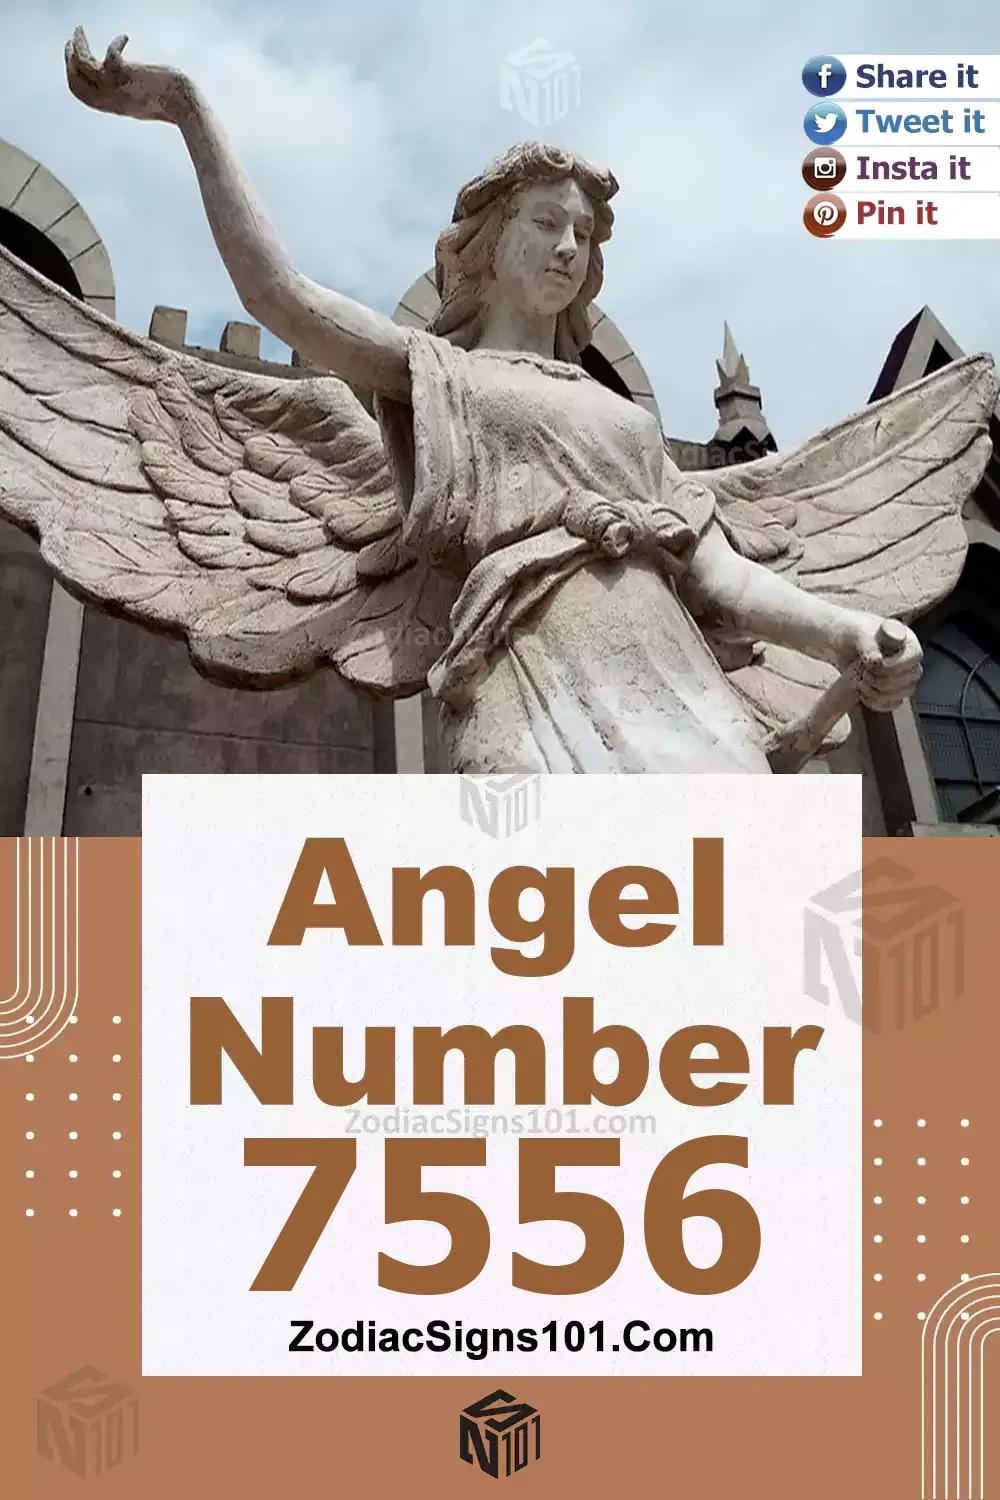 7556 Angel Number Meaning